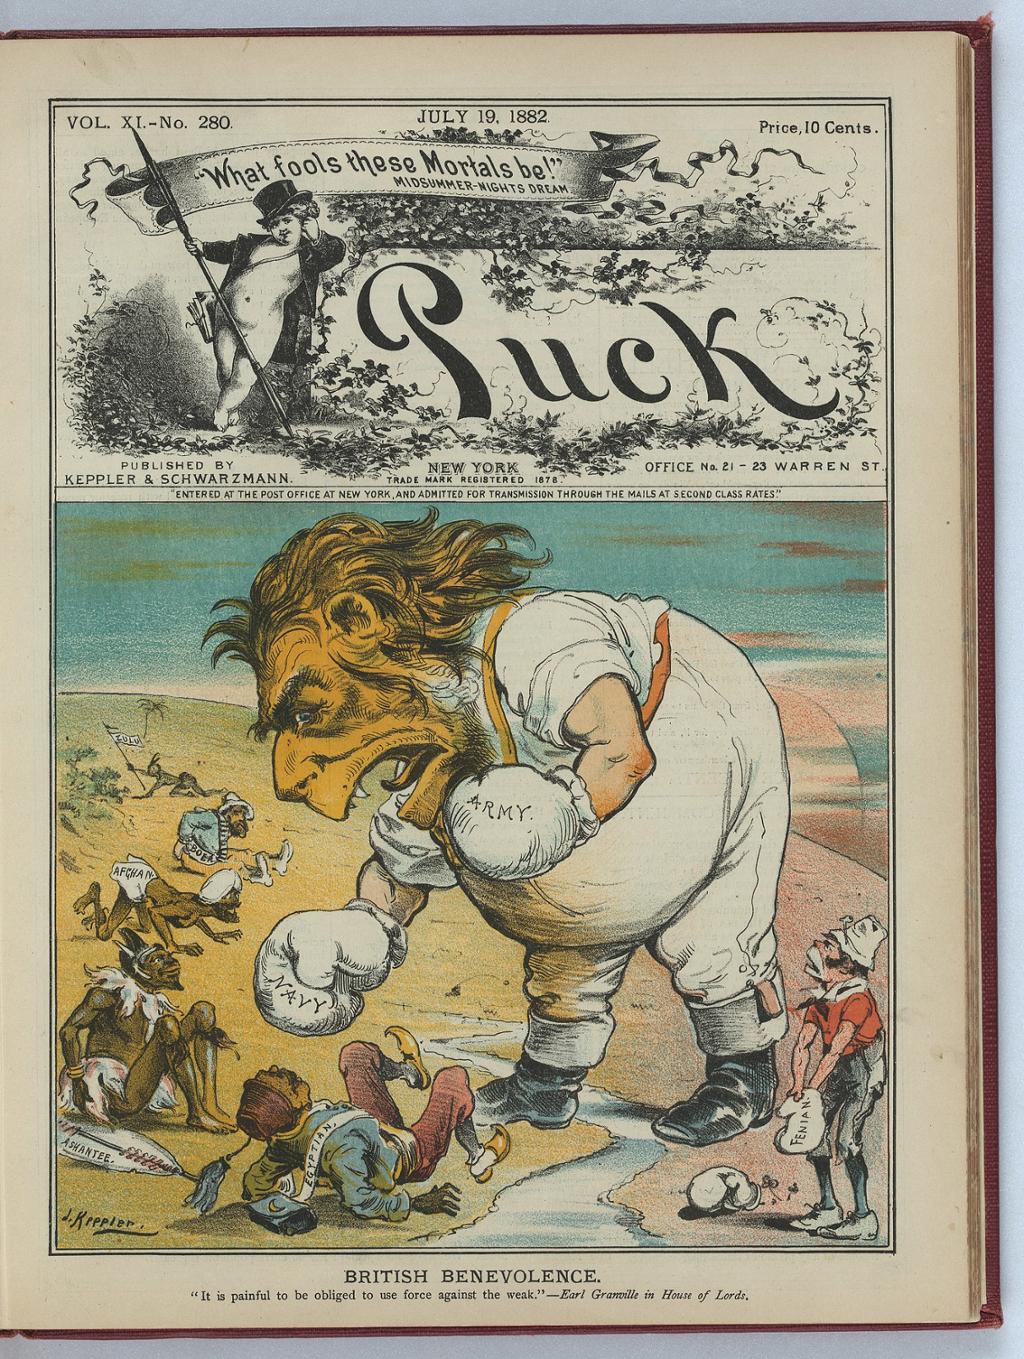 Drawing: We see a man with a head like a lion wearing boxing gloves with army and navy written on them. He is much bigger than the people he is roaring and punching towards, who are caricatures of people from Africa and Asia. Below the drawing it says "British Benevolence.  It is painful to be obliged to use force against the weak --Earl Granville in House of Lords."